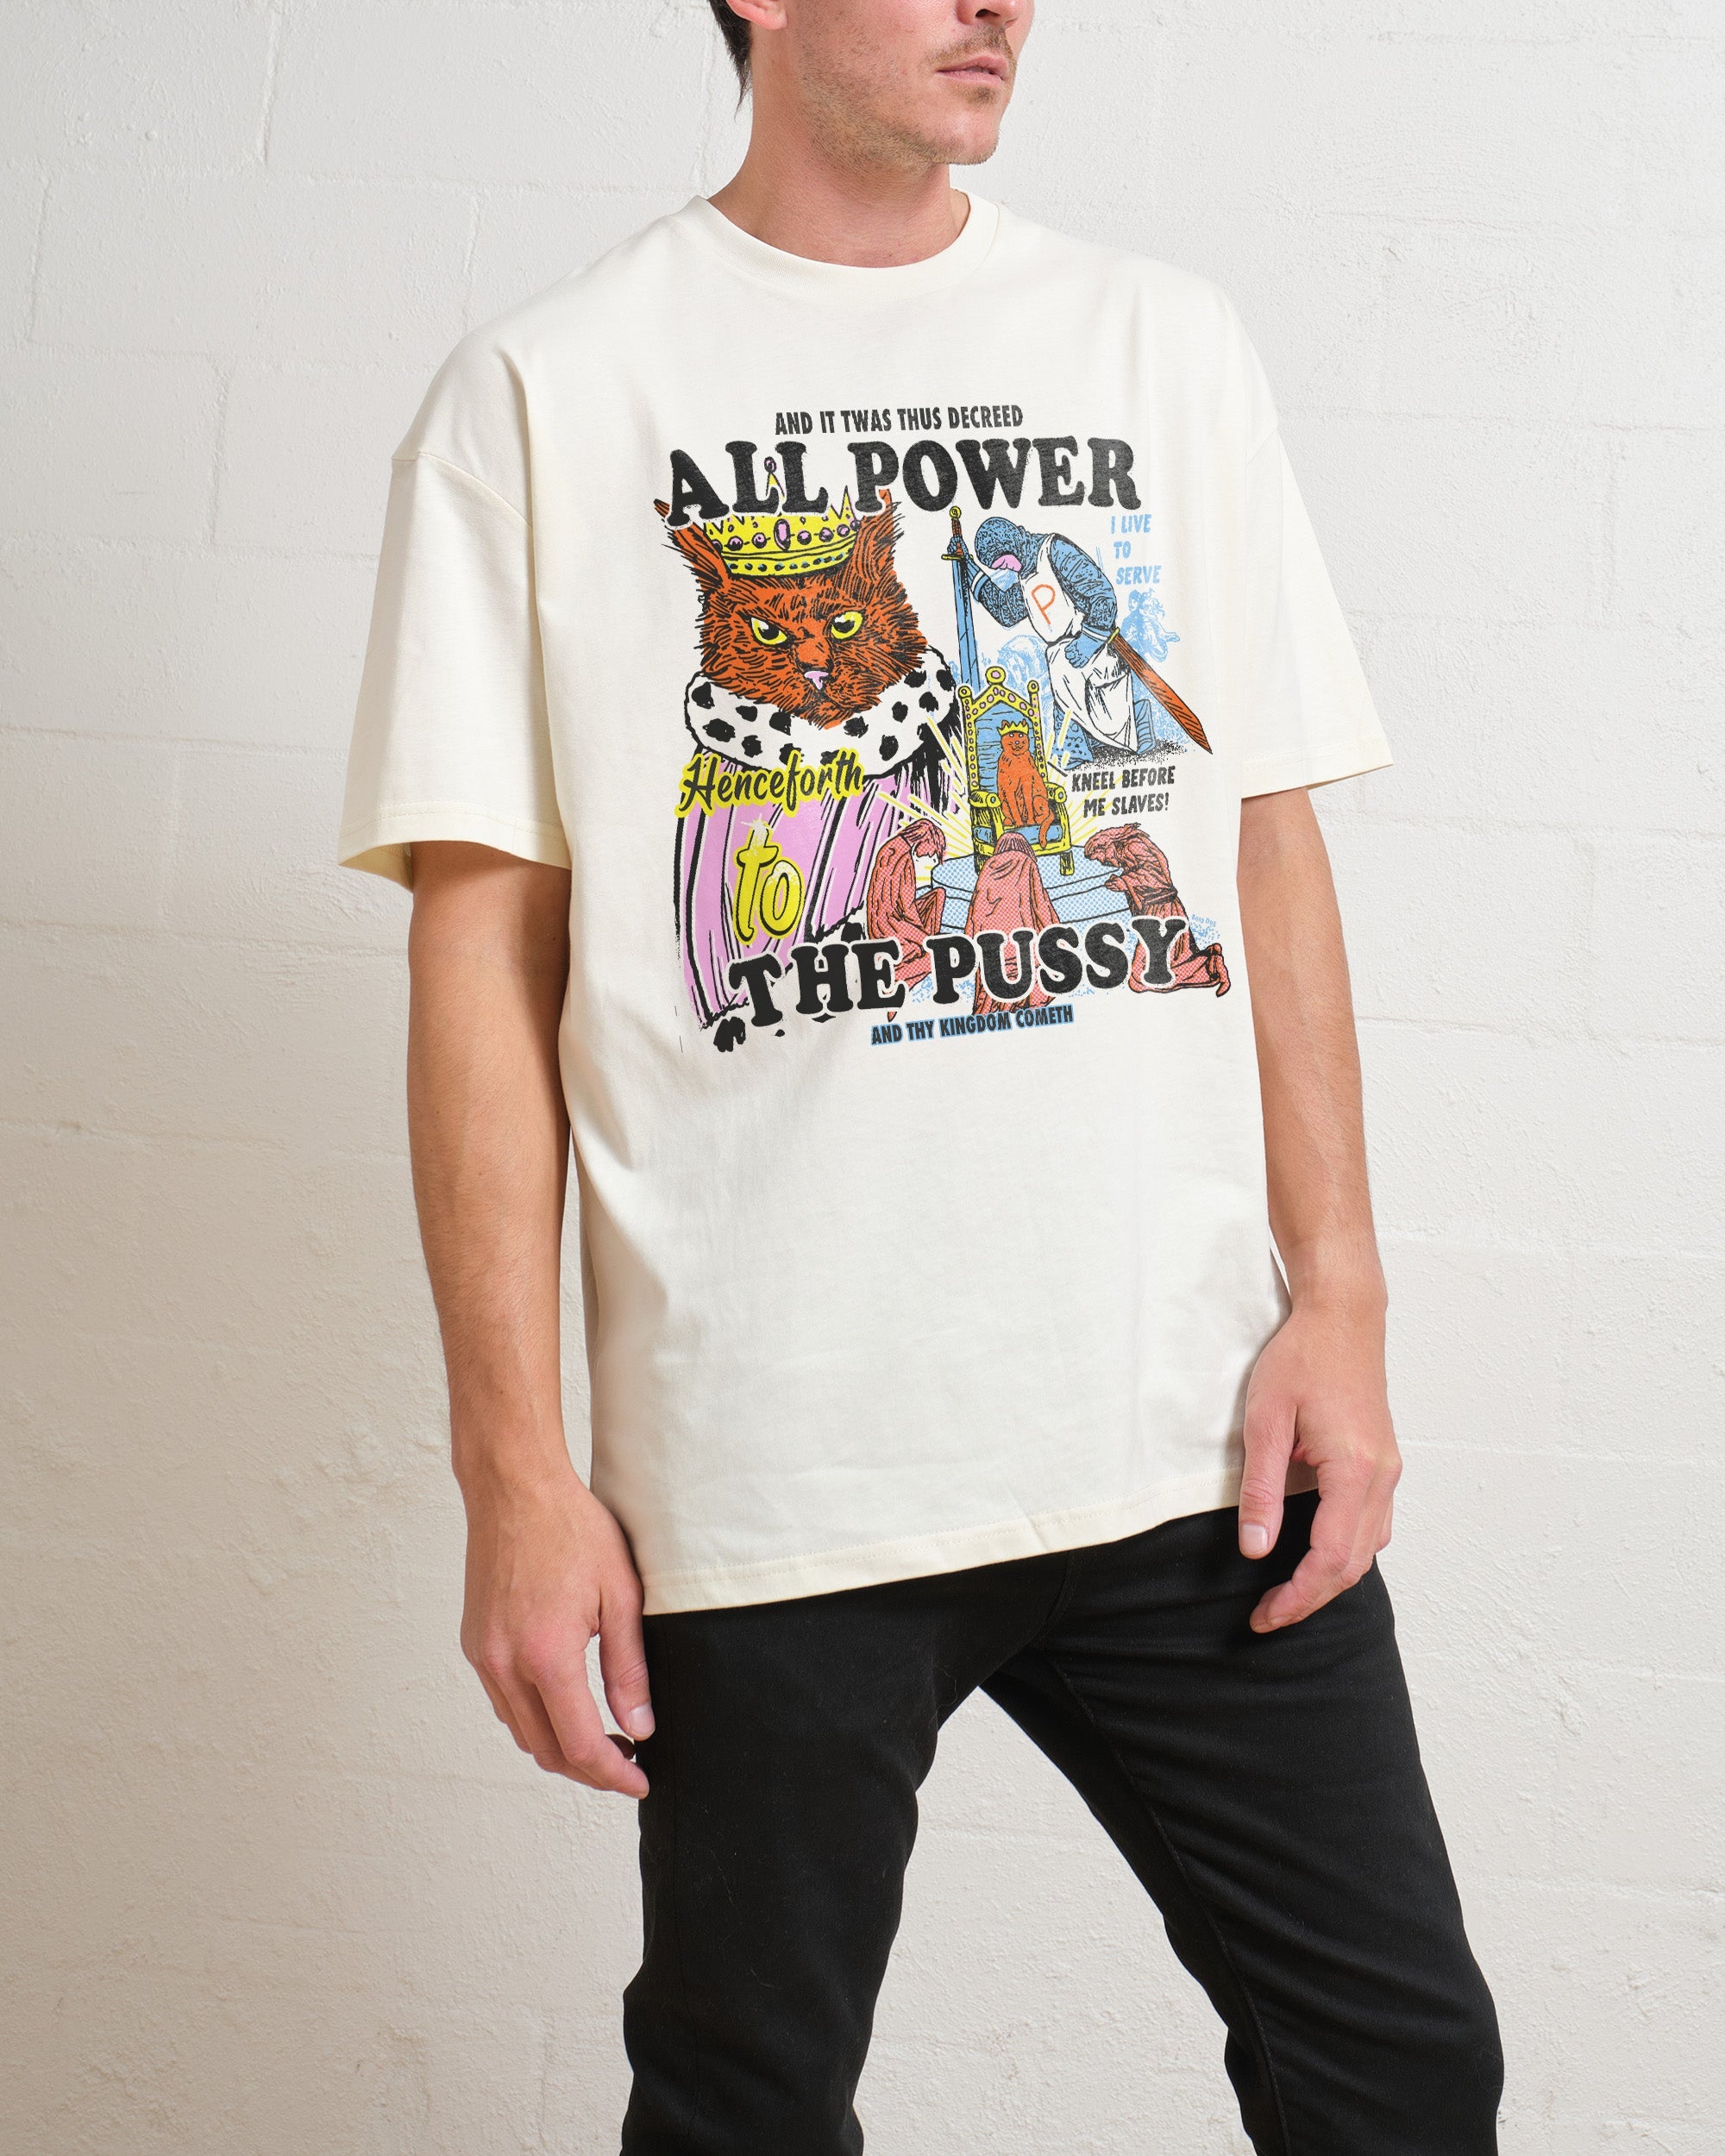 All Power To The Pussy T-Shirt Australia Online Natural